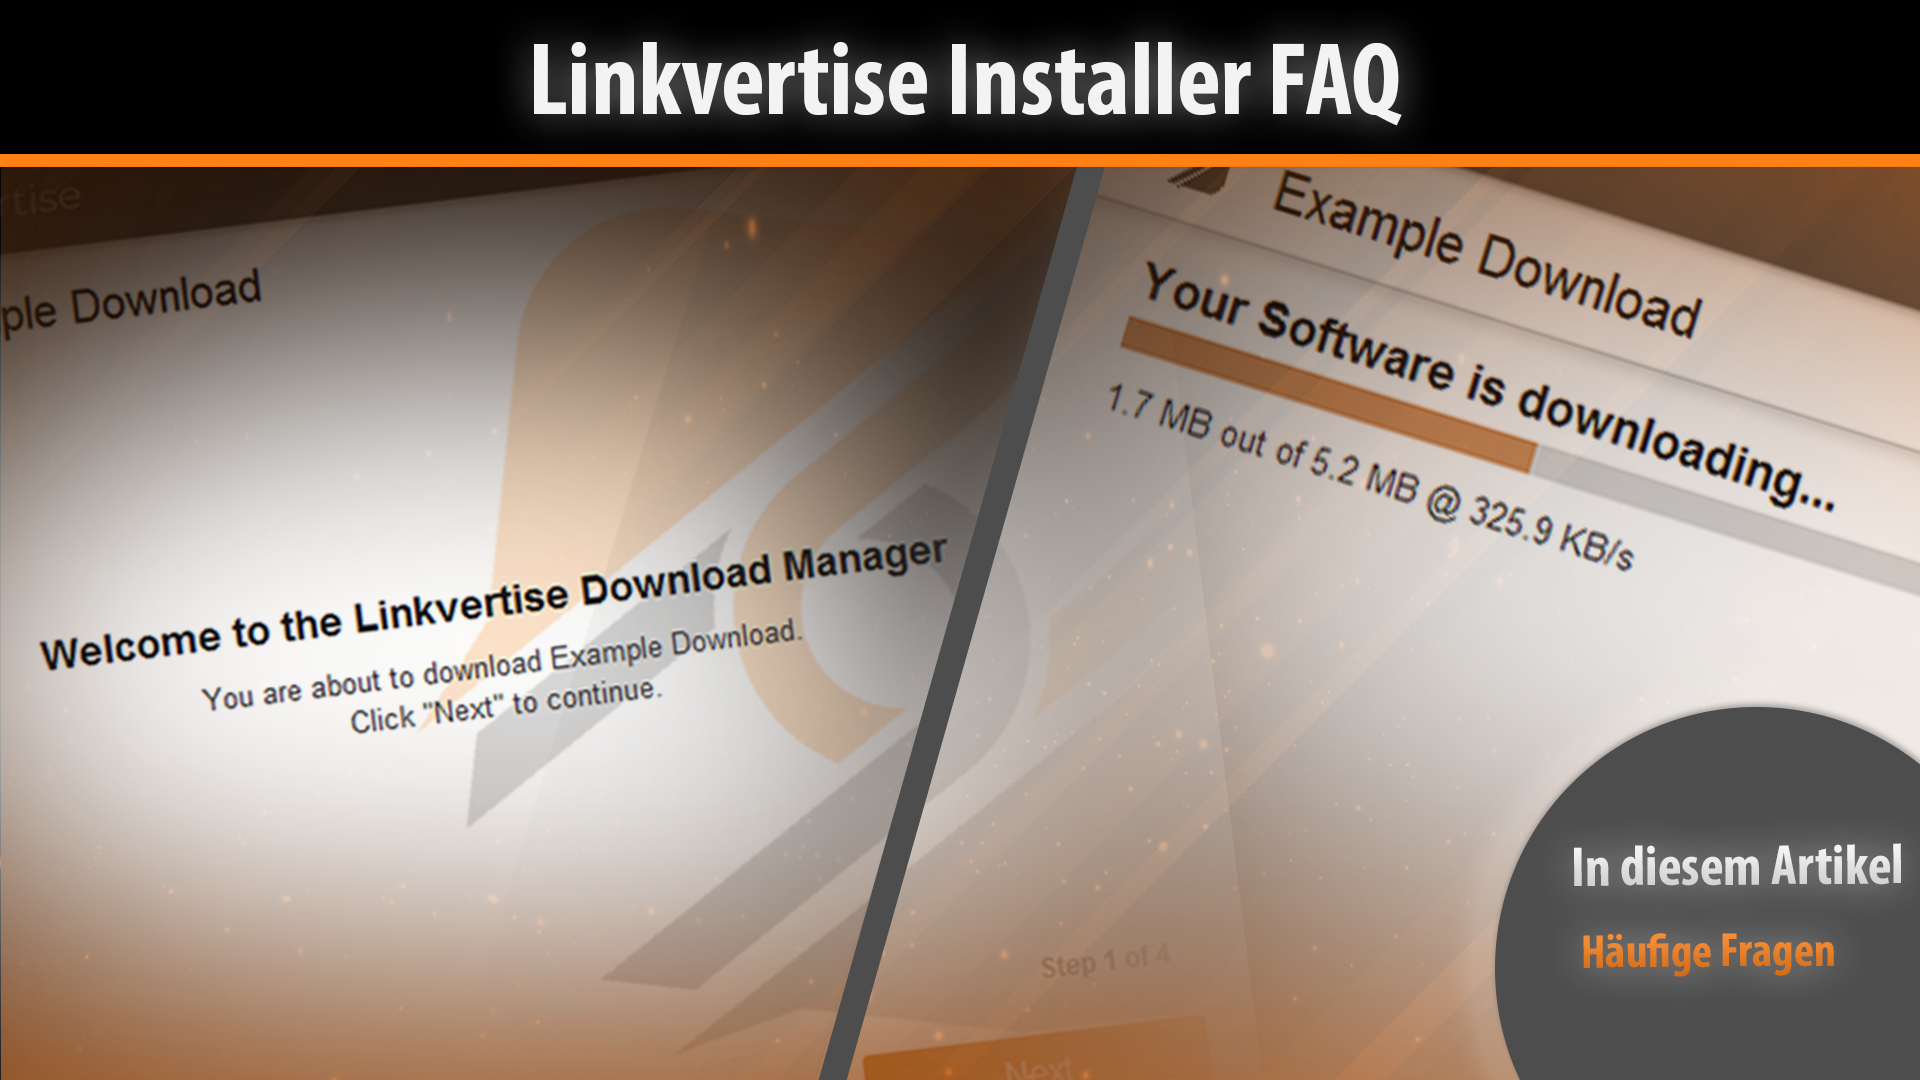 How to download from linkvertise